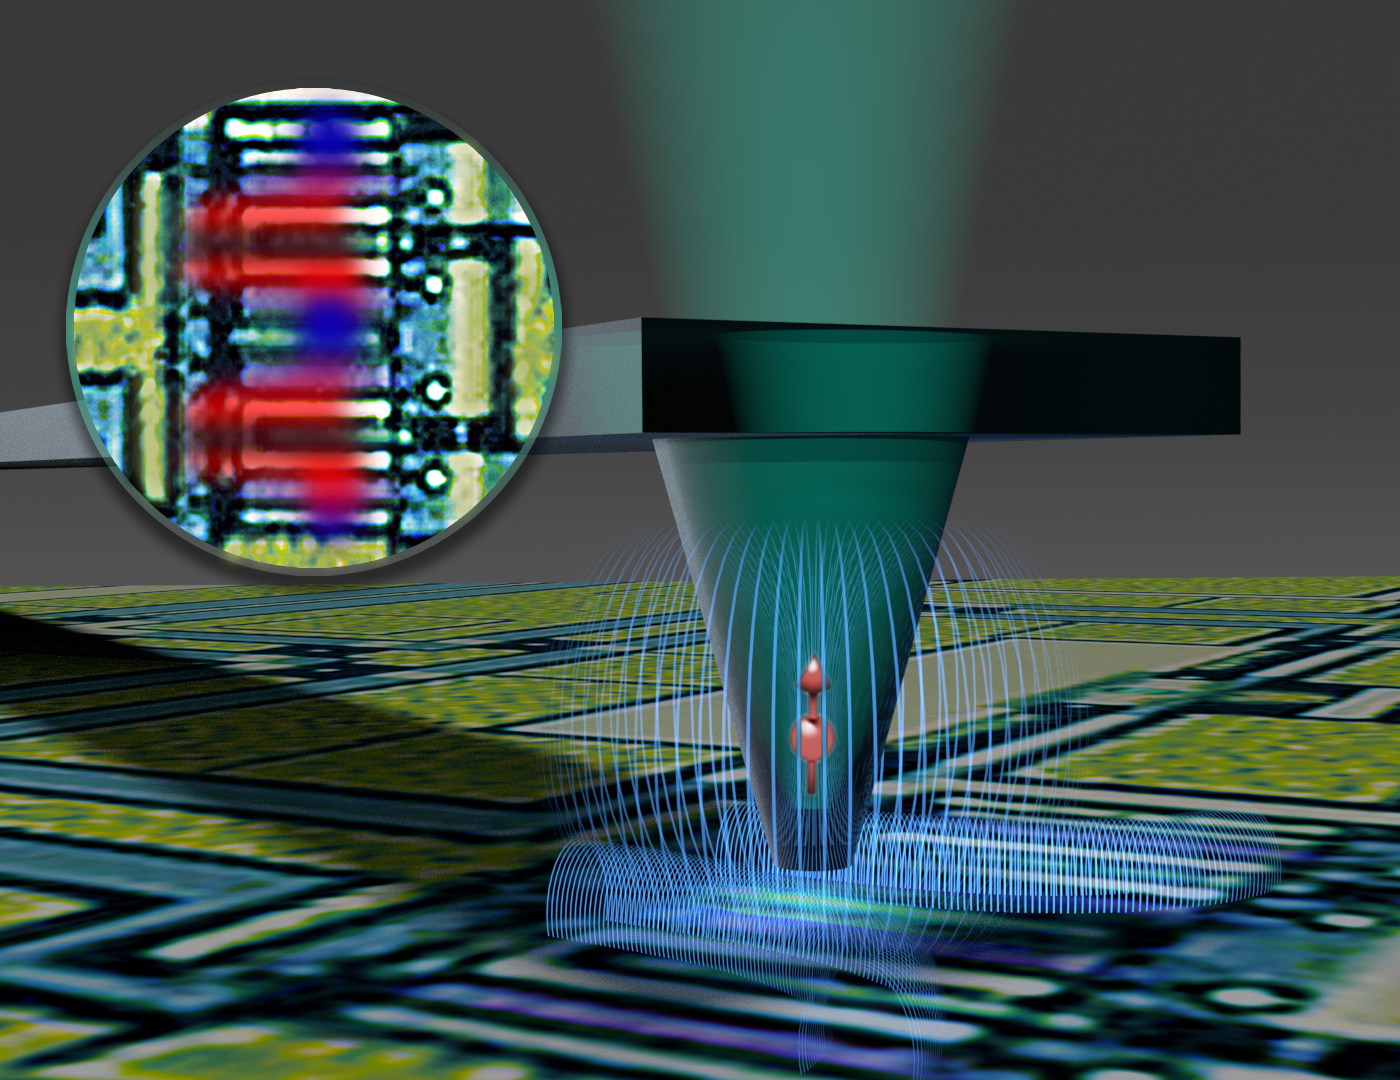 Schematic visualization of a scanning probe quantum magnetometer with an NV diamond tip that can detect and visualize currents in nanoelectronic circuits.